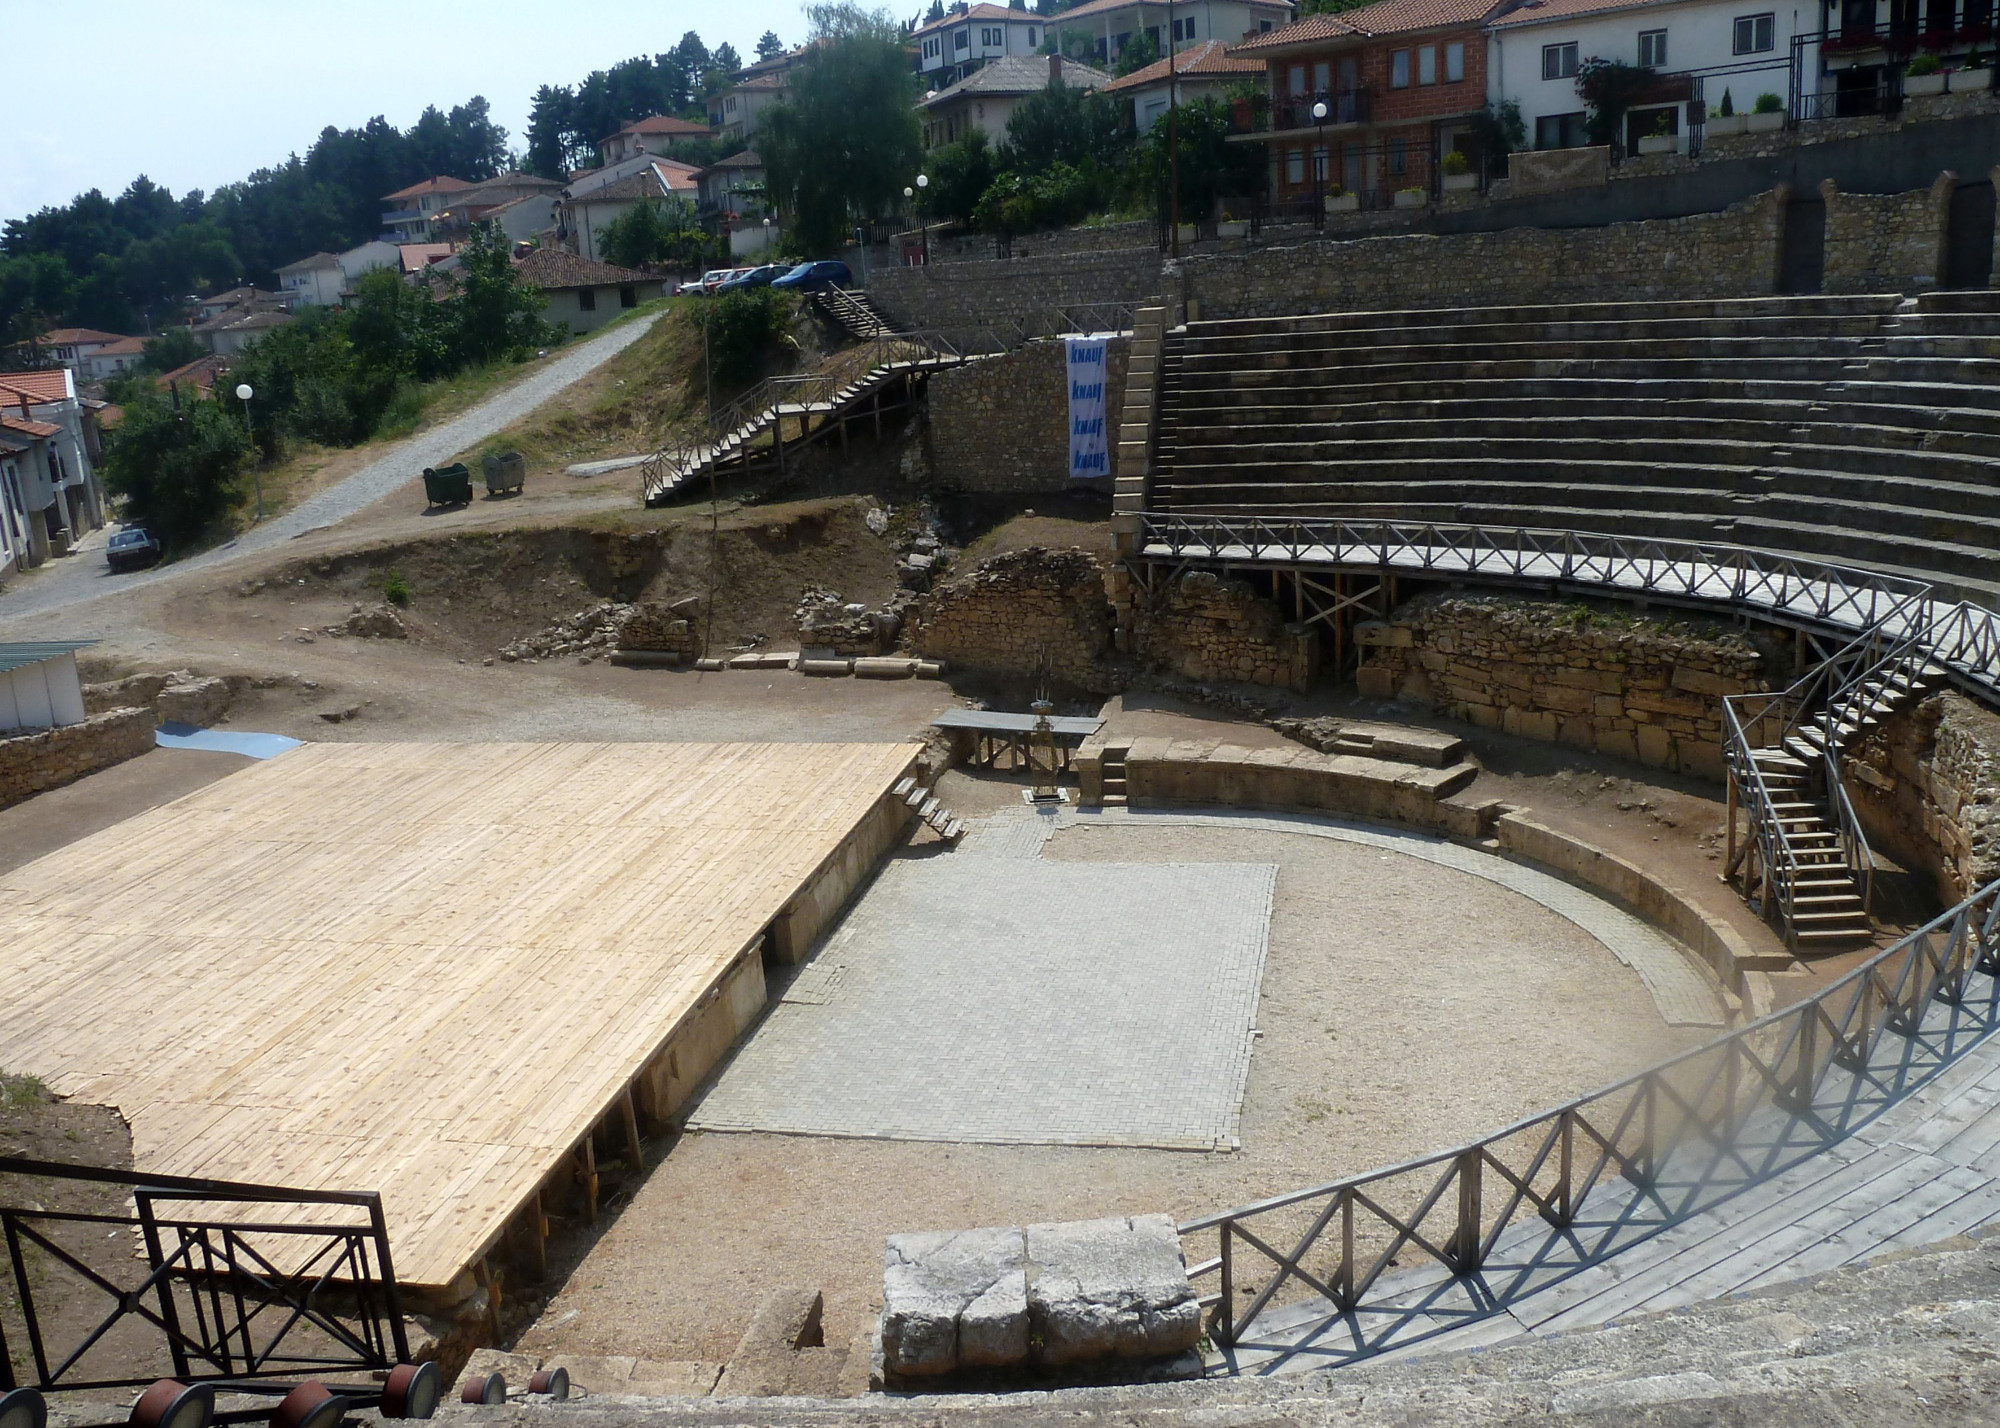 Classical Greek open-air amphitheater dating to circa 200 BCE, today a summer performance venue.